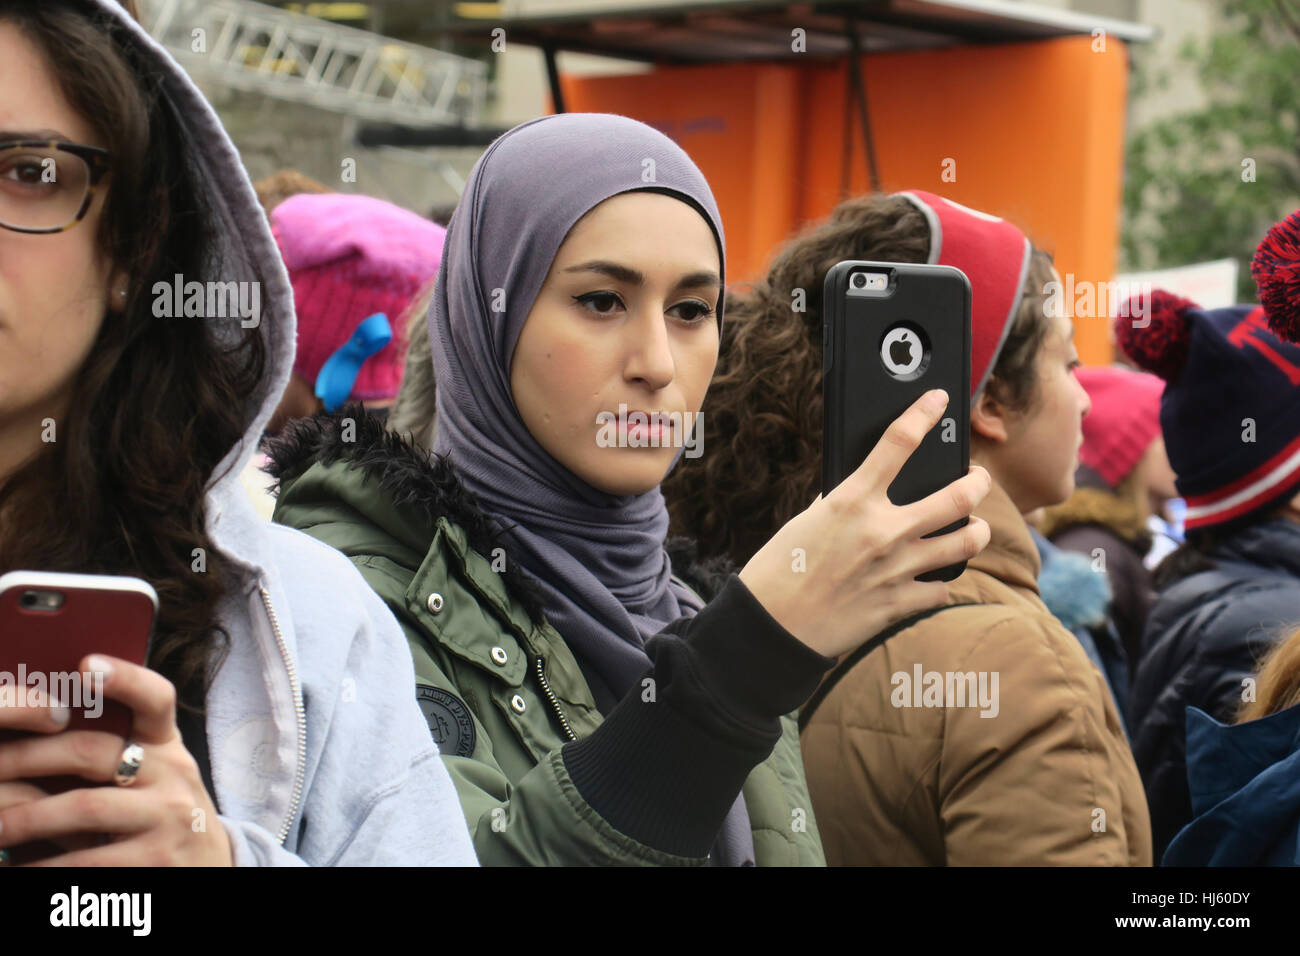 Muslim woman with iPhone during the Women's march in Washington Stock Photo